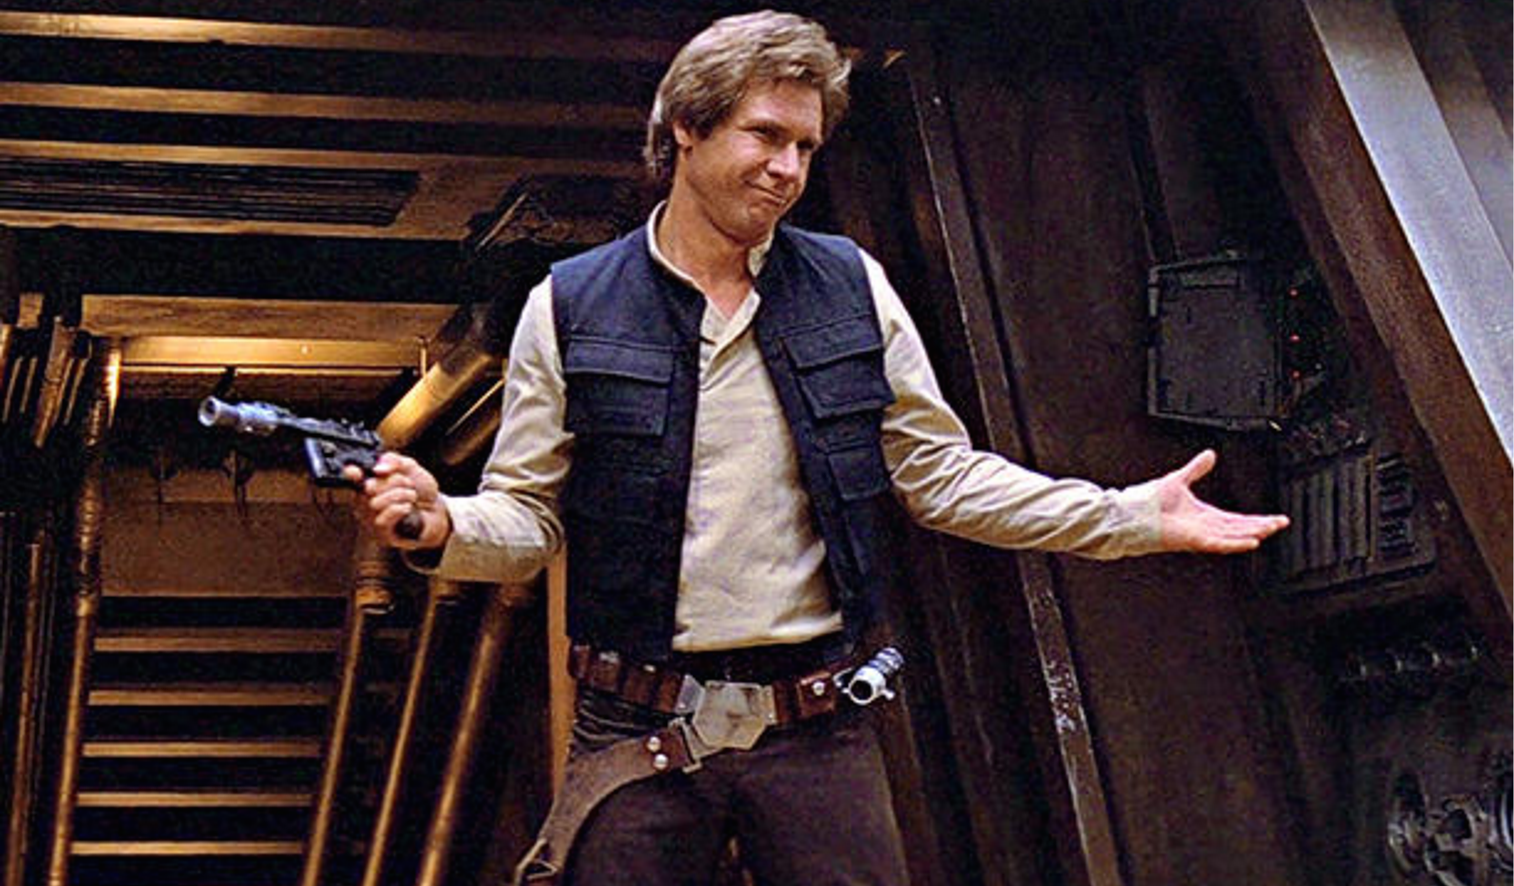 Han solo casting rumors, star wars spinoff